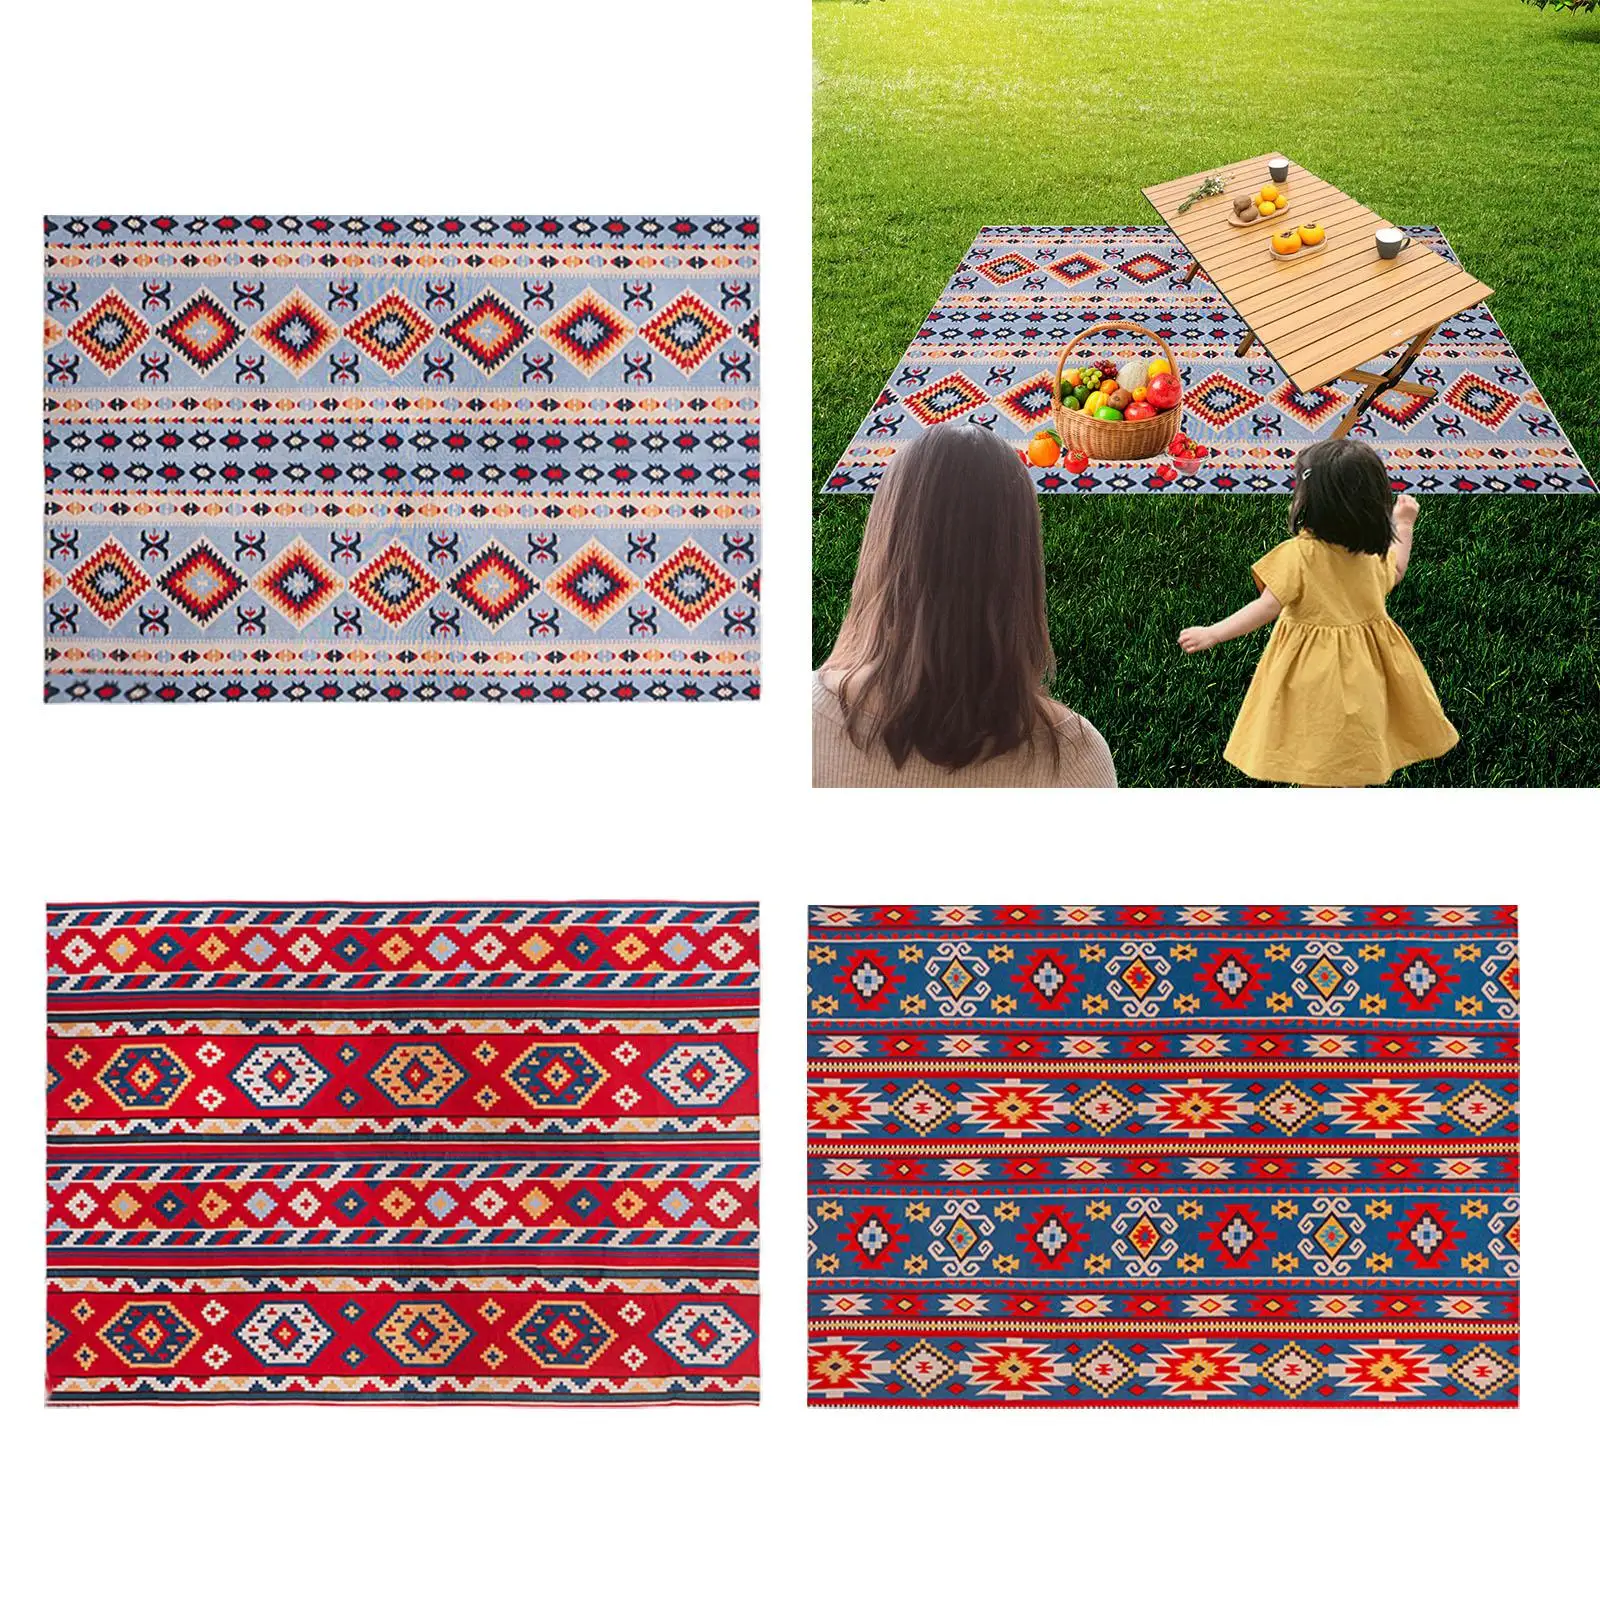 Large Picnic Outdoor Blanket Outdoor Picnic Blanket for Travel Camping